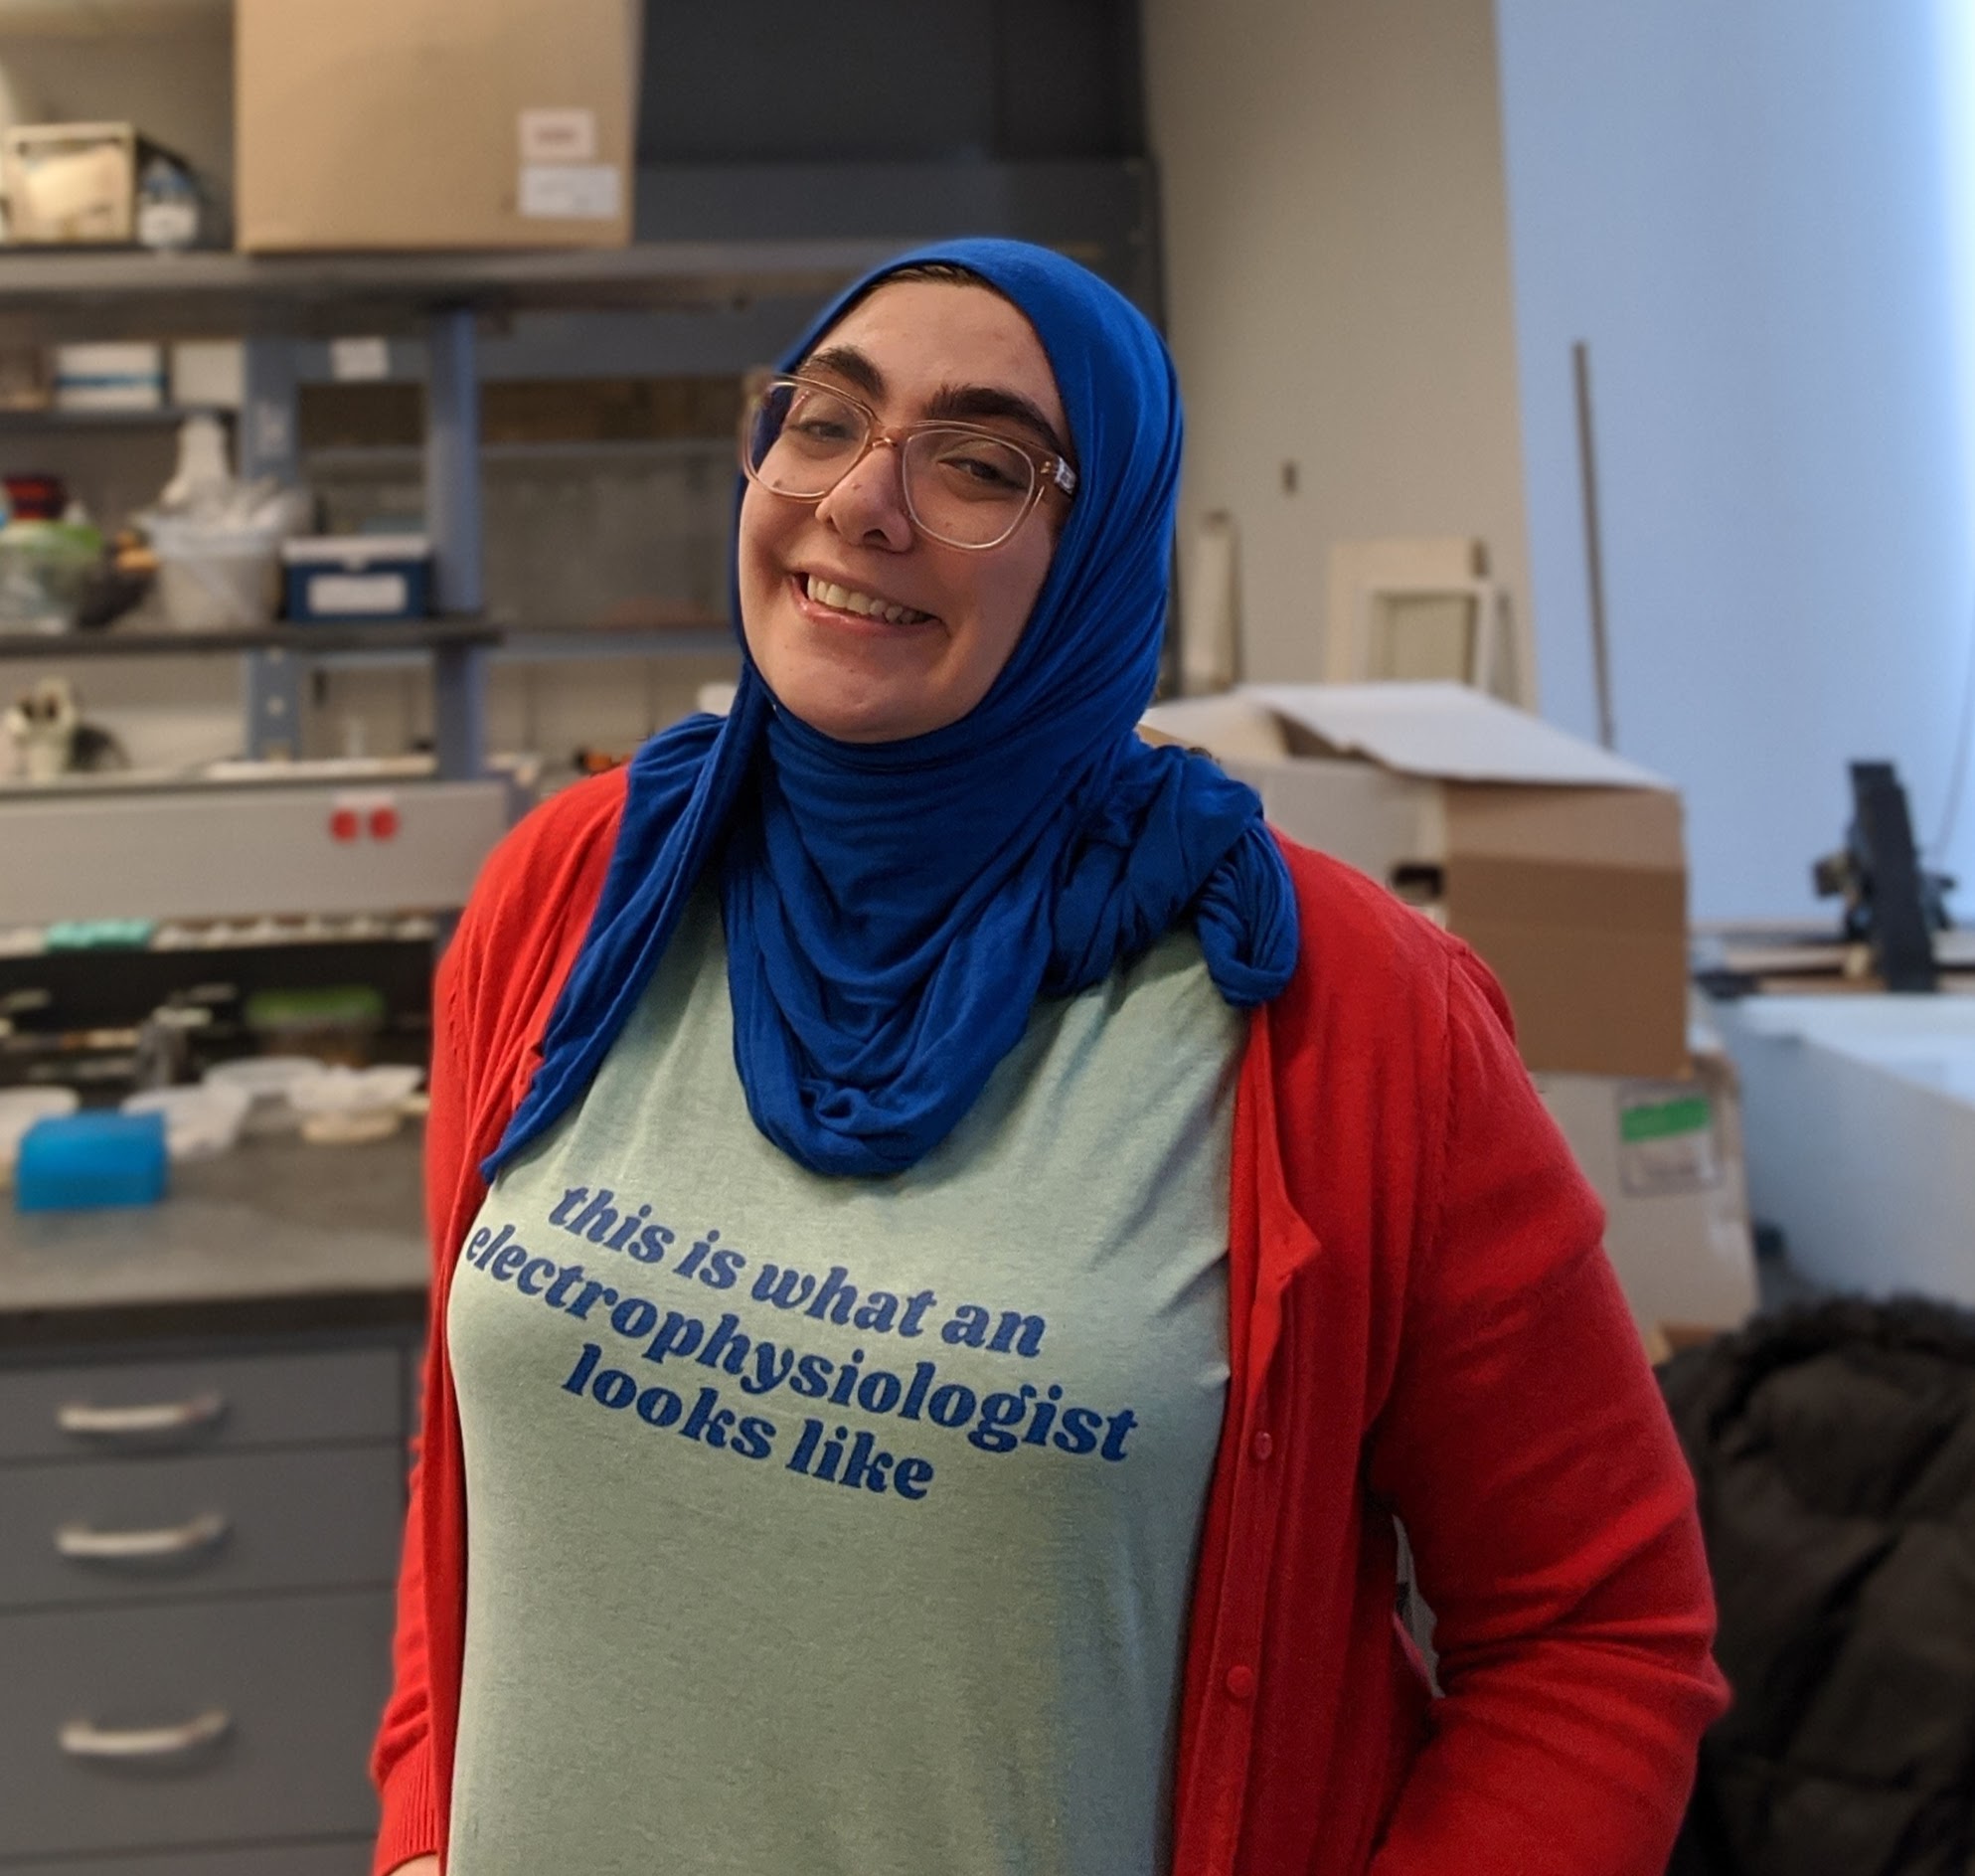 Picture of Nour Al-muhtasib standing in a lab setting.